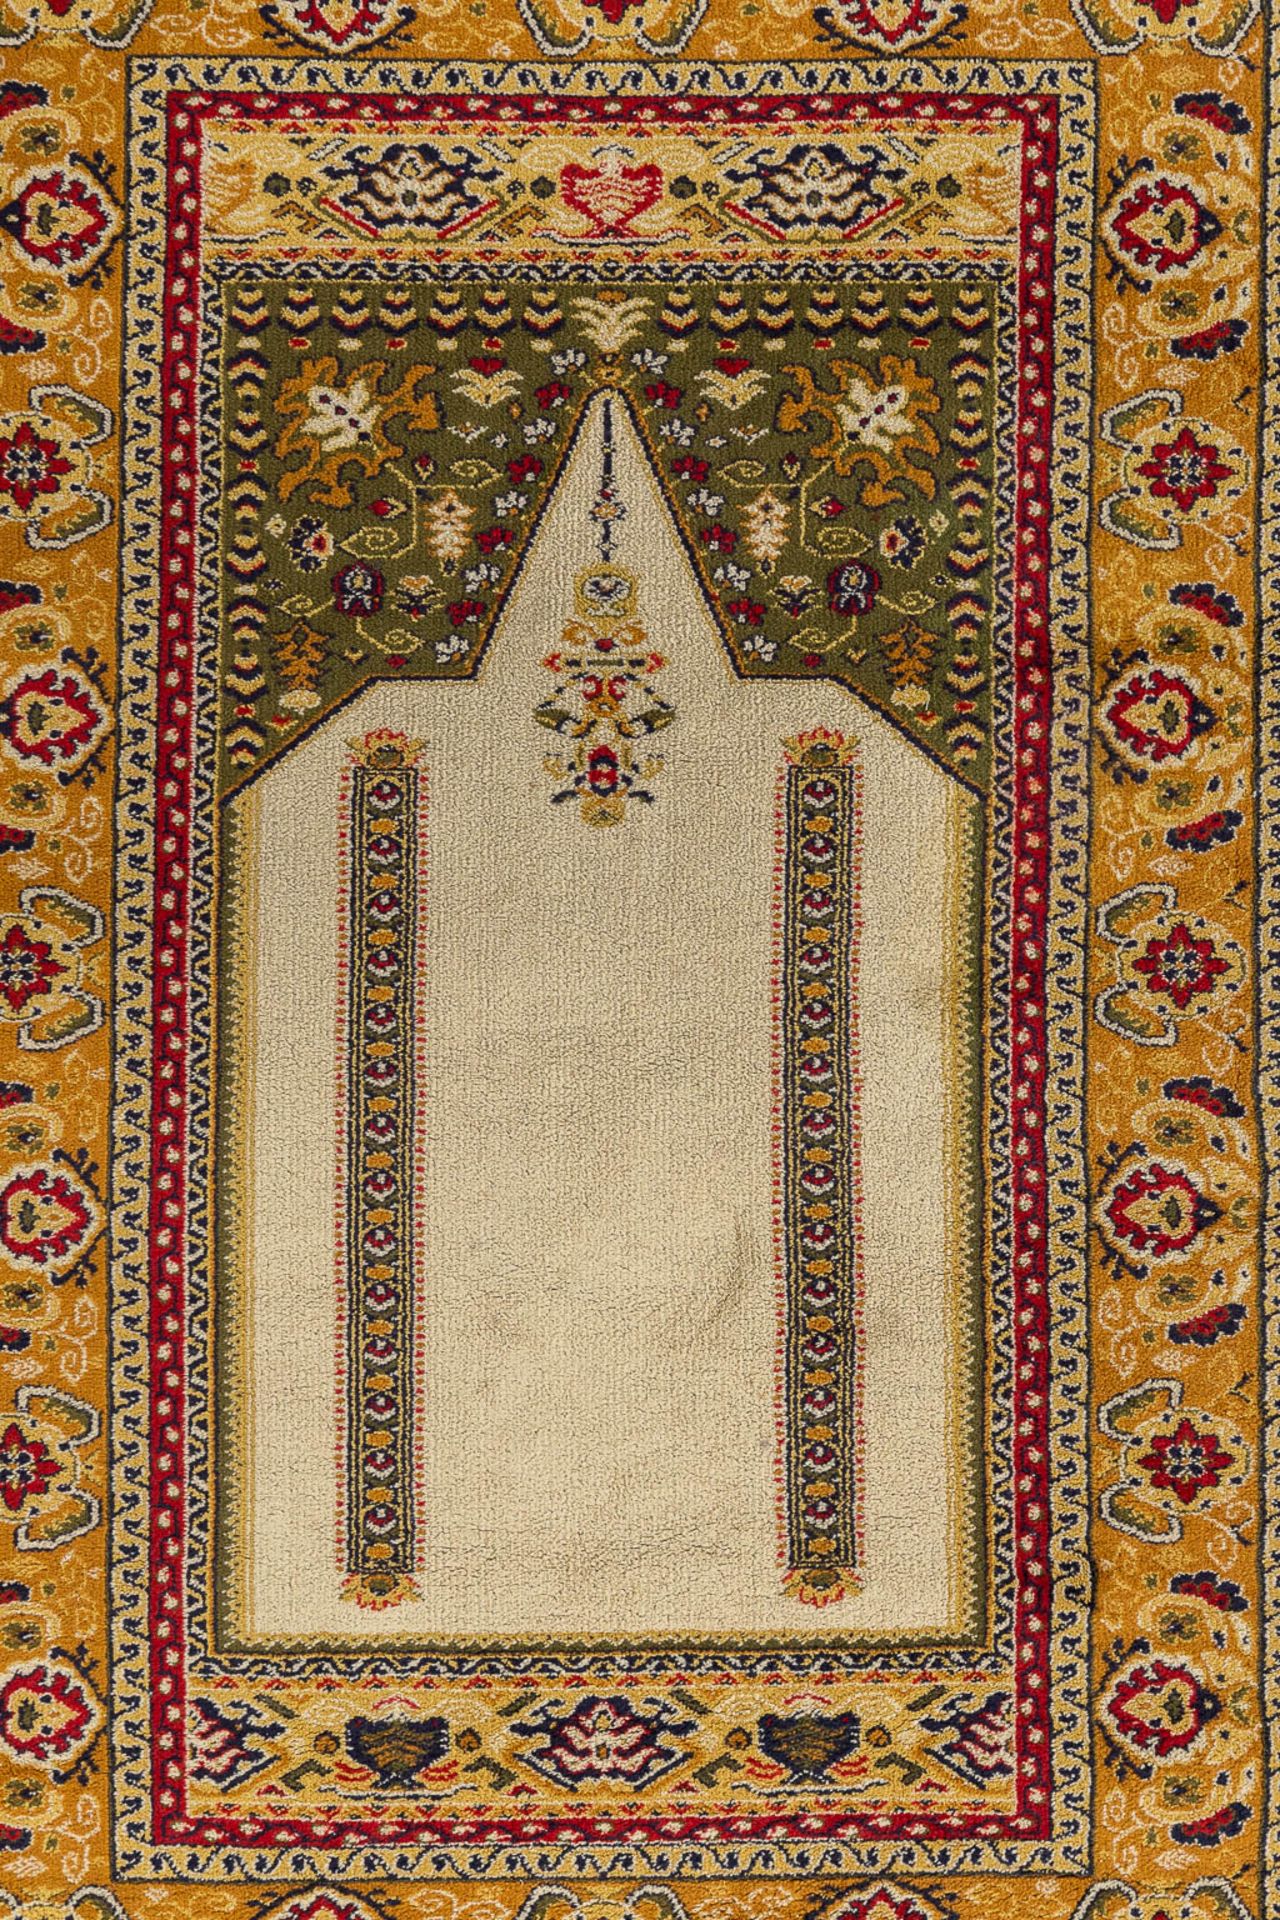 A collection of 3 Oriental hand-made carpets. Kashan and a prayer rug. (L: 180 x W: 119 cm) - Image 6 of 12